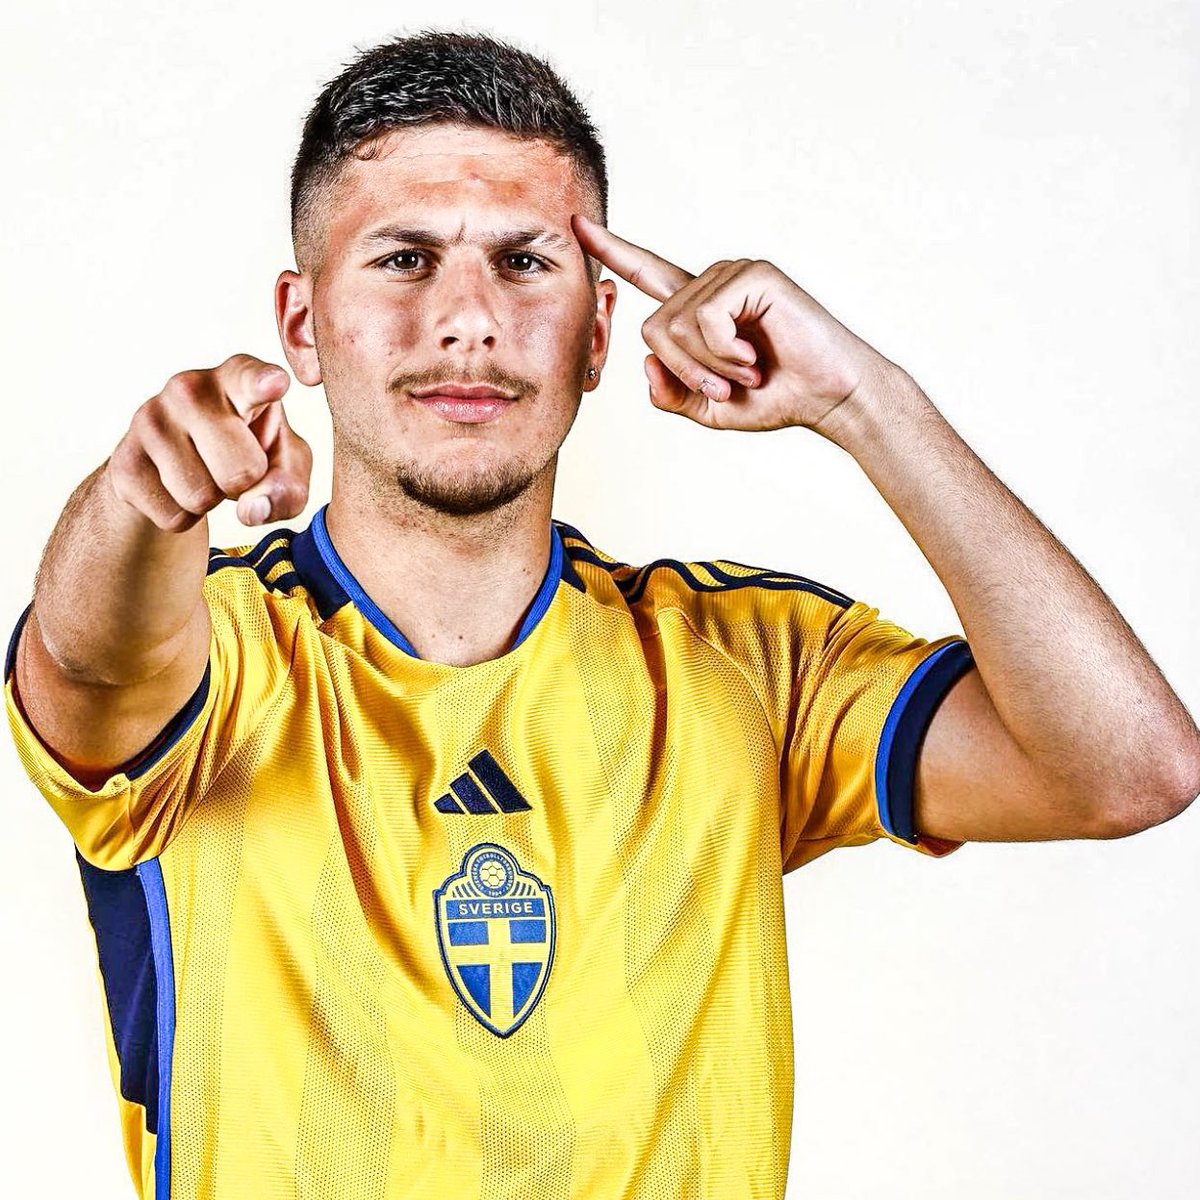 🚨🇸🇪 Swedish talent Roony Bardghji has torn his ACL, injury confirmed by Copenhagen.

The winger on the shortlist of several clubs for the future will be out for the next 6 months.